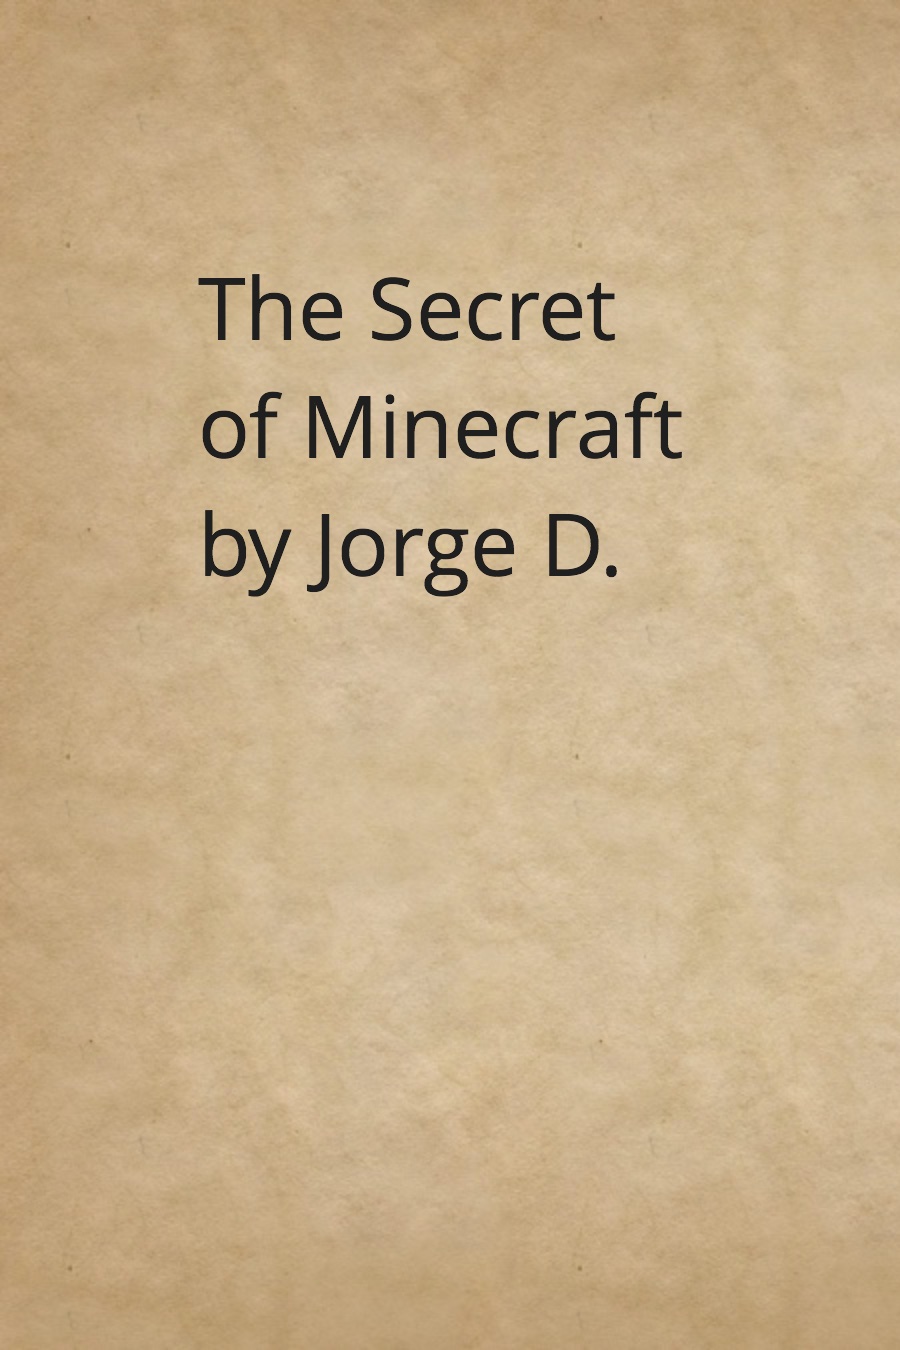 The Secret of Minecraft by Jorge D